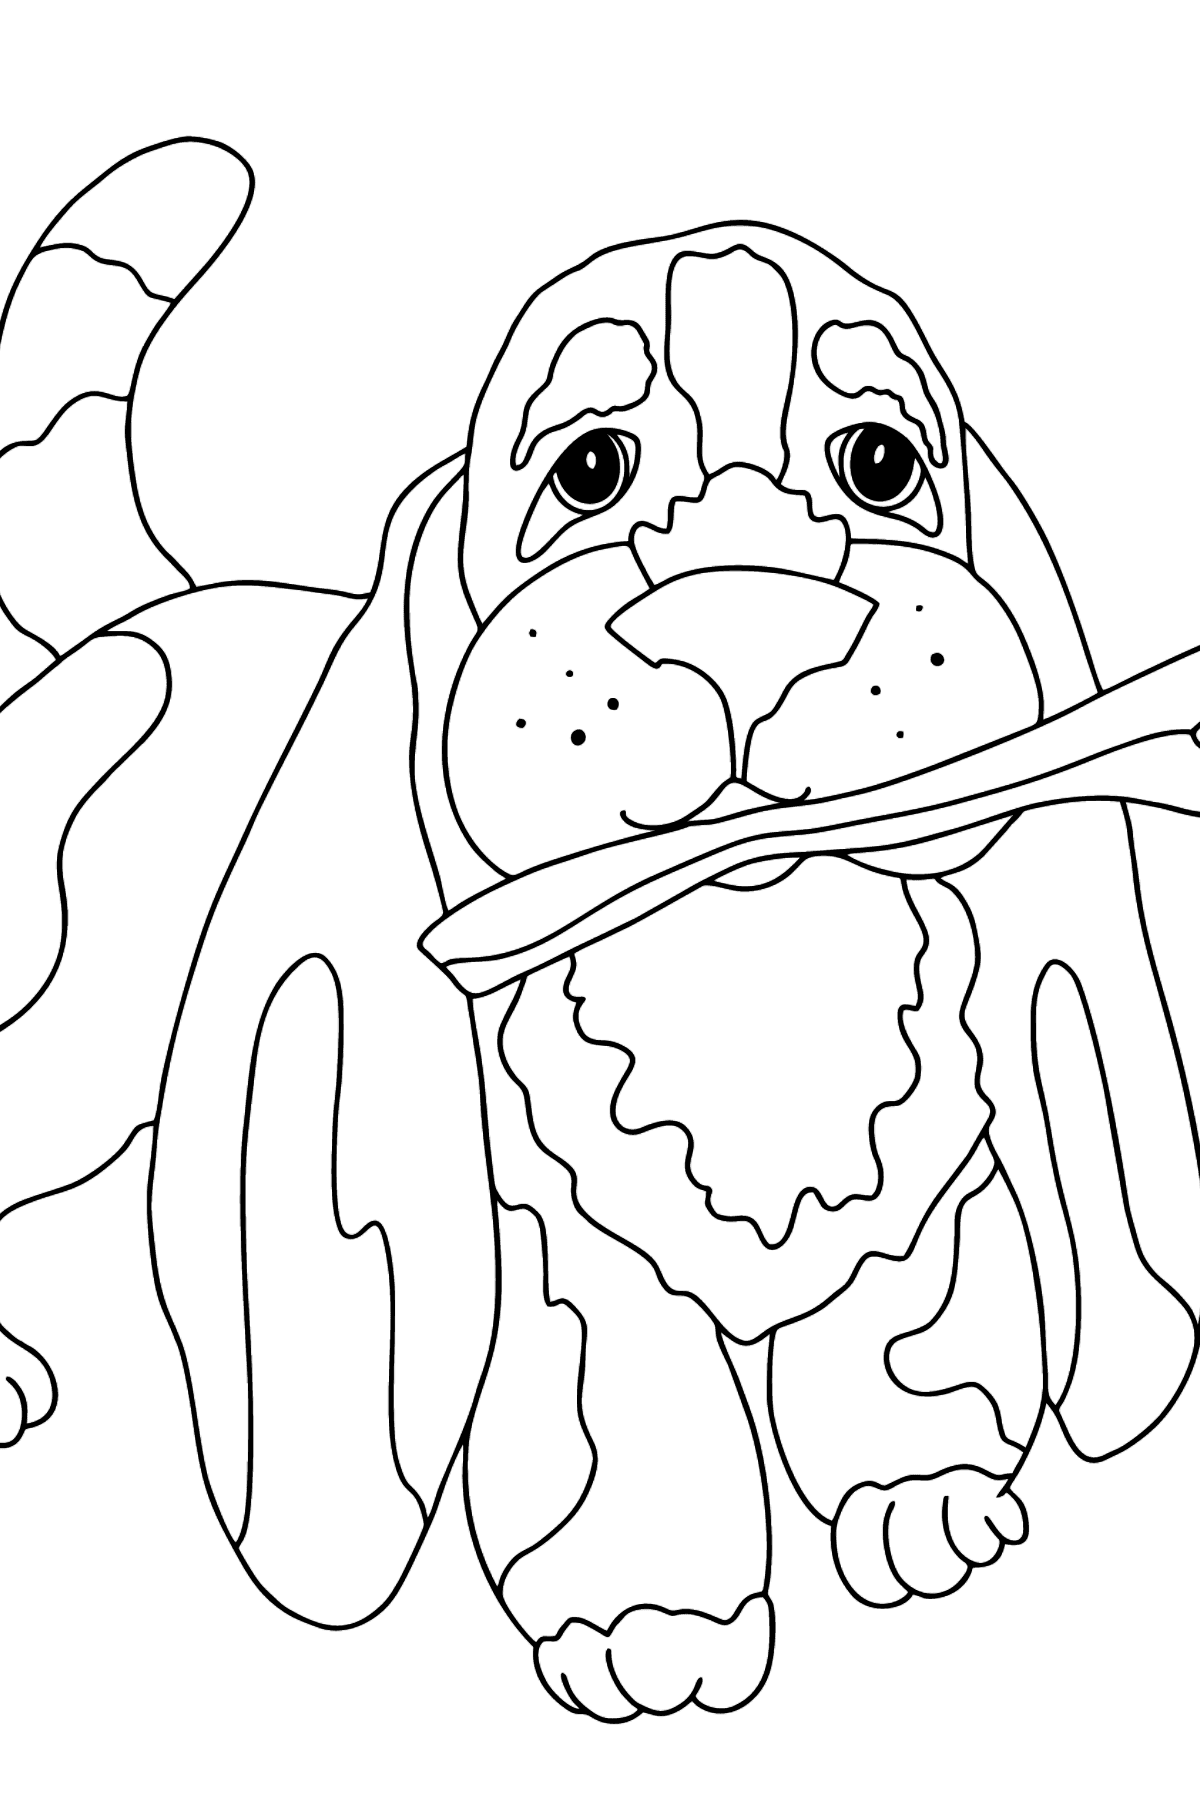 Coloring Page - A Dog is Playing with a Stick - Coloring Pages for Kids